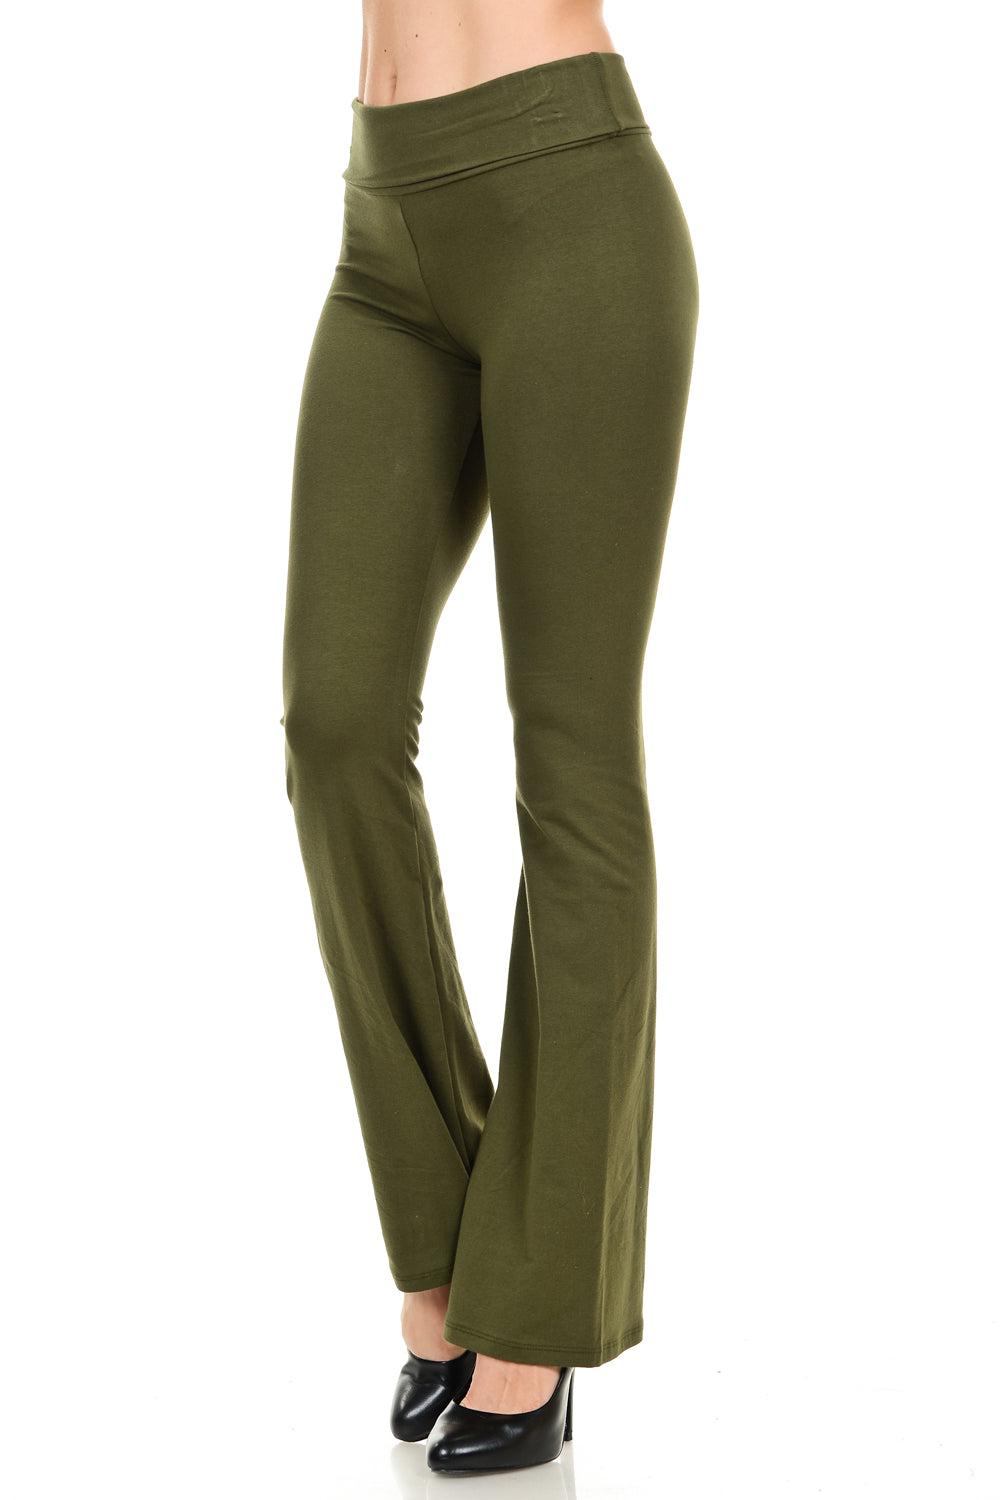 Women's Cotton Spandex Yoga Pants with Fold-Over Waistband